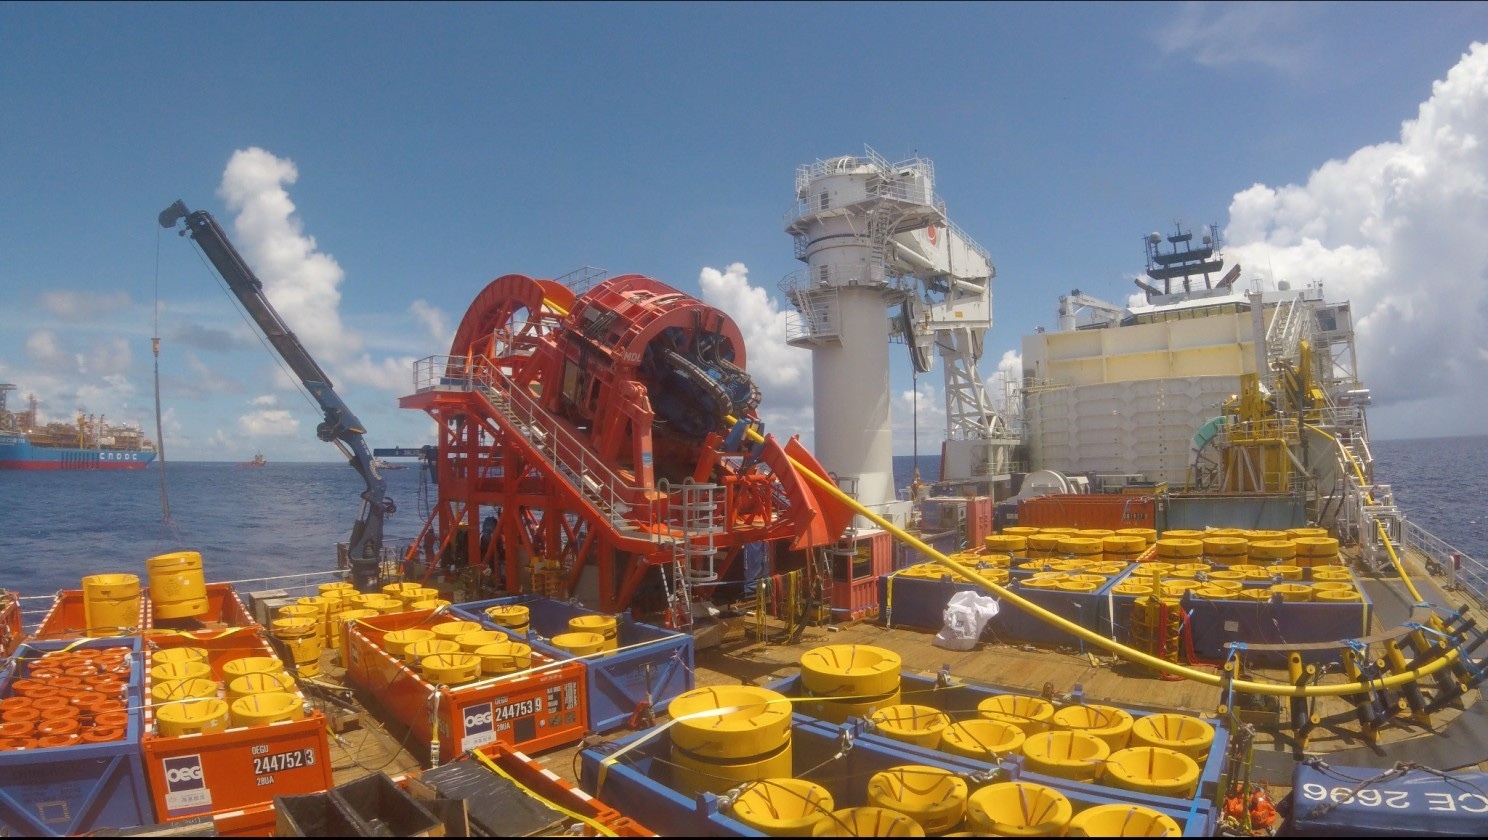 MDL HLS efficiently installing umbilical with buoyancy modules in the South China Sea